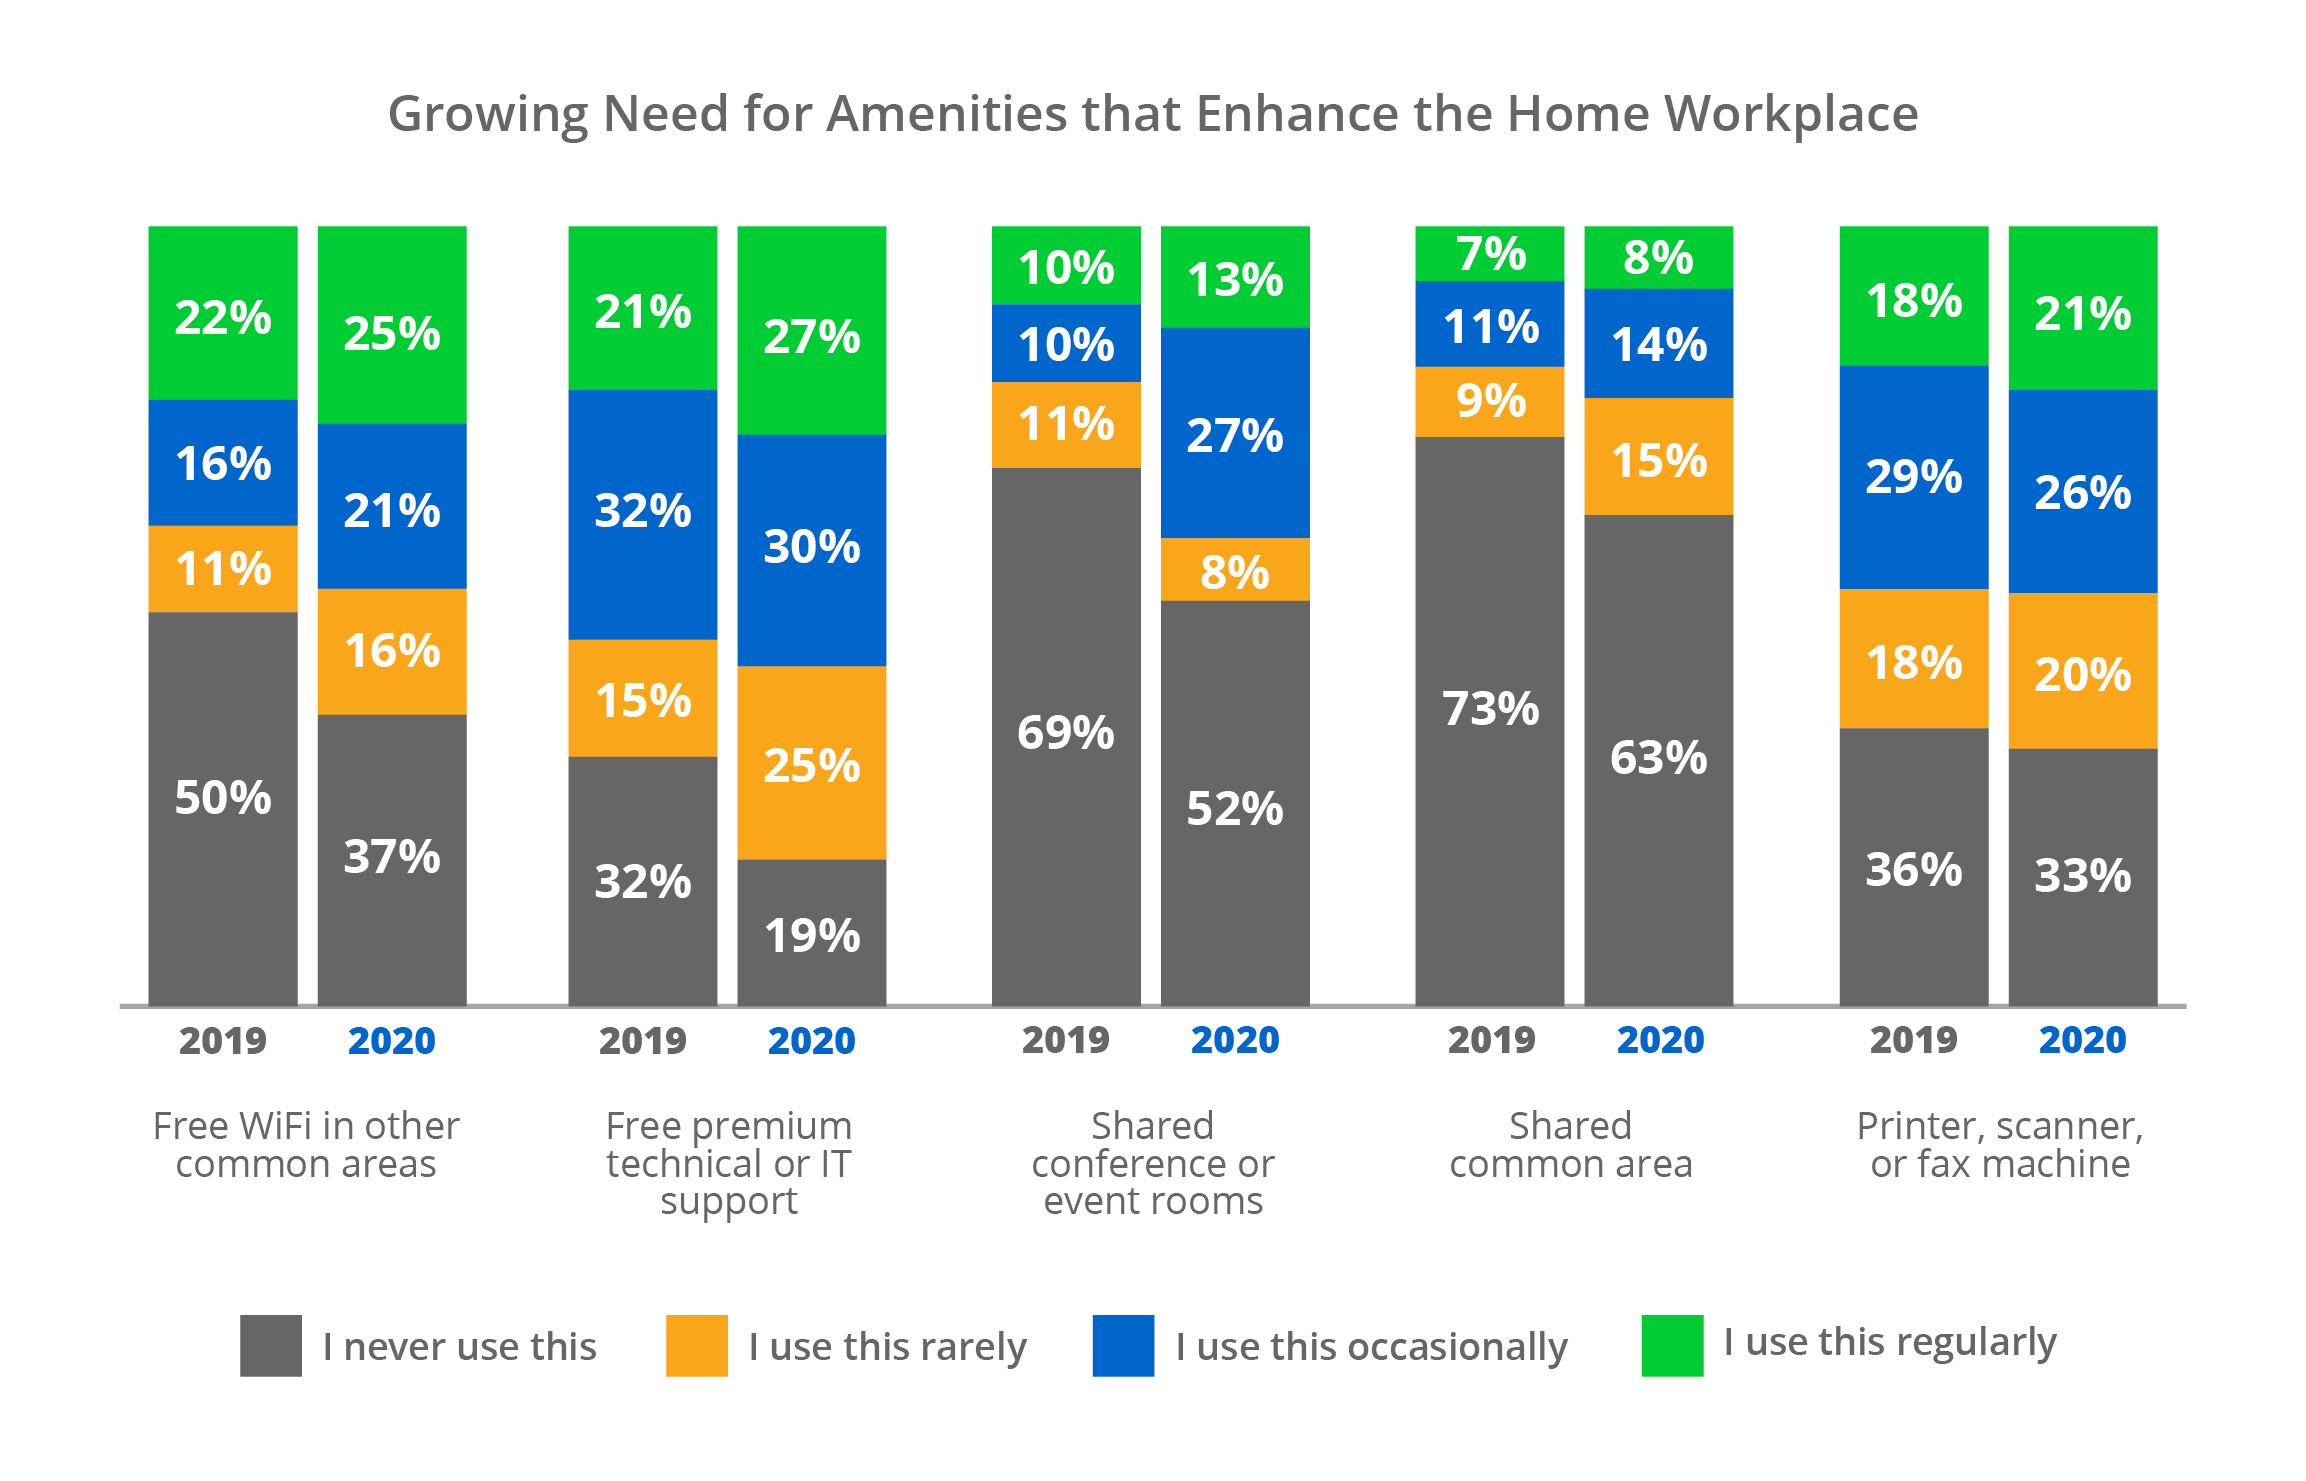 Graph showing the growing need for amenities that enhance the home workspace